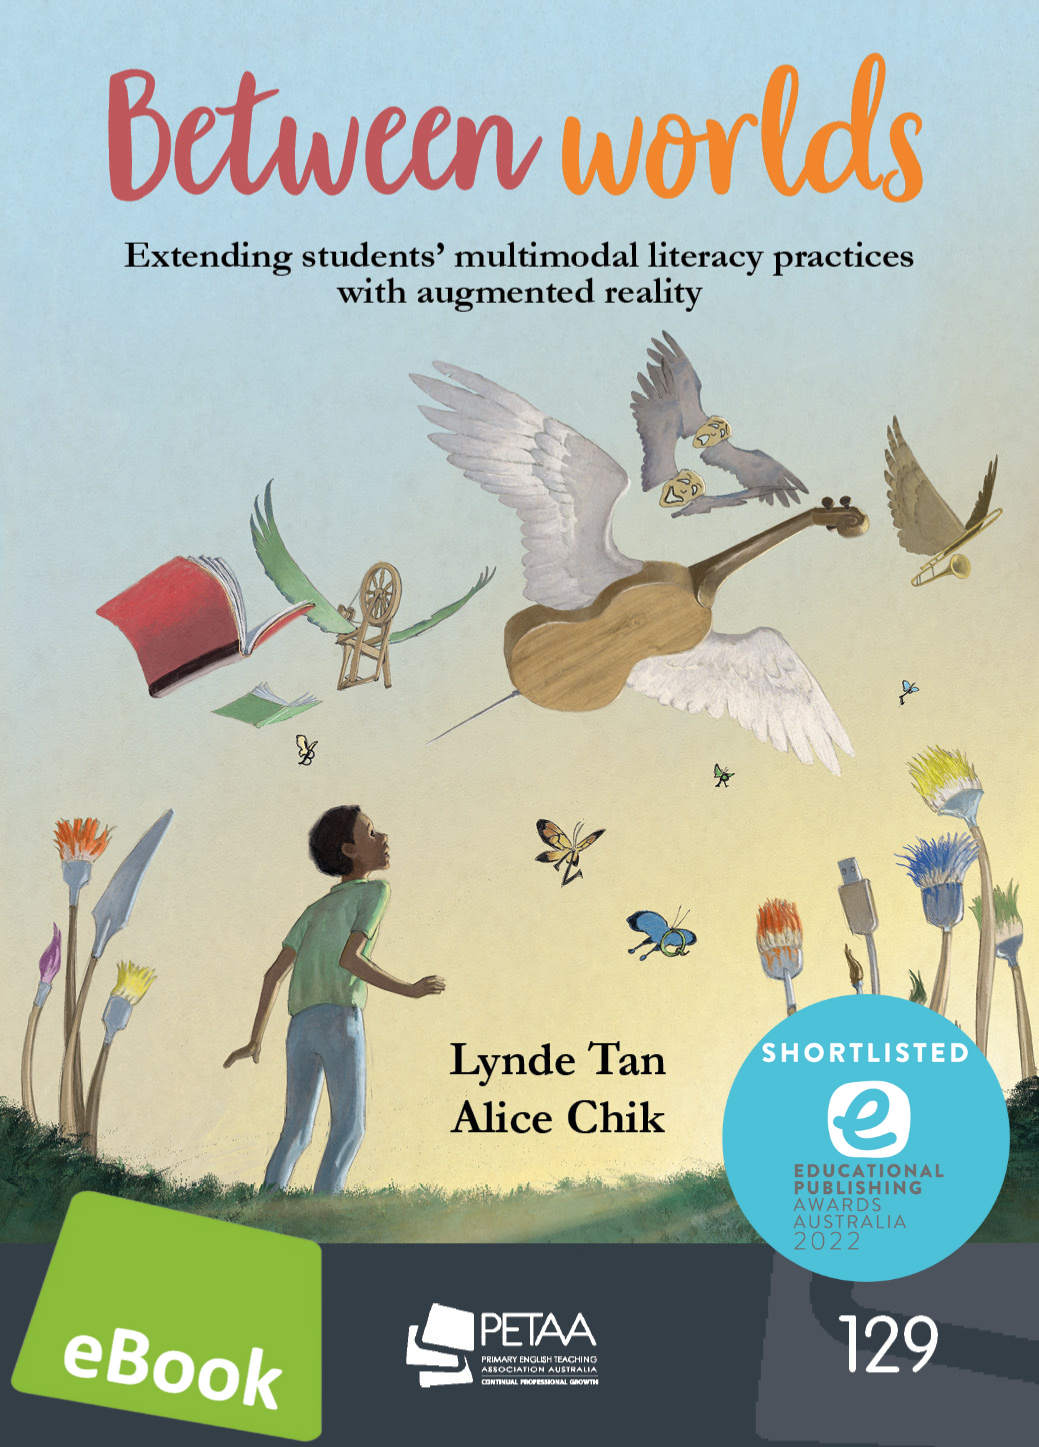 eBook - Extending students’ multimodal literacy with AR